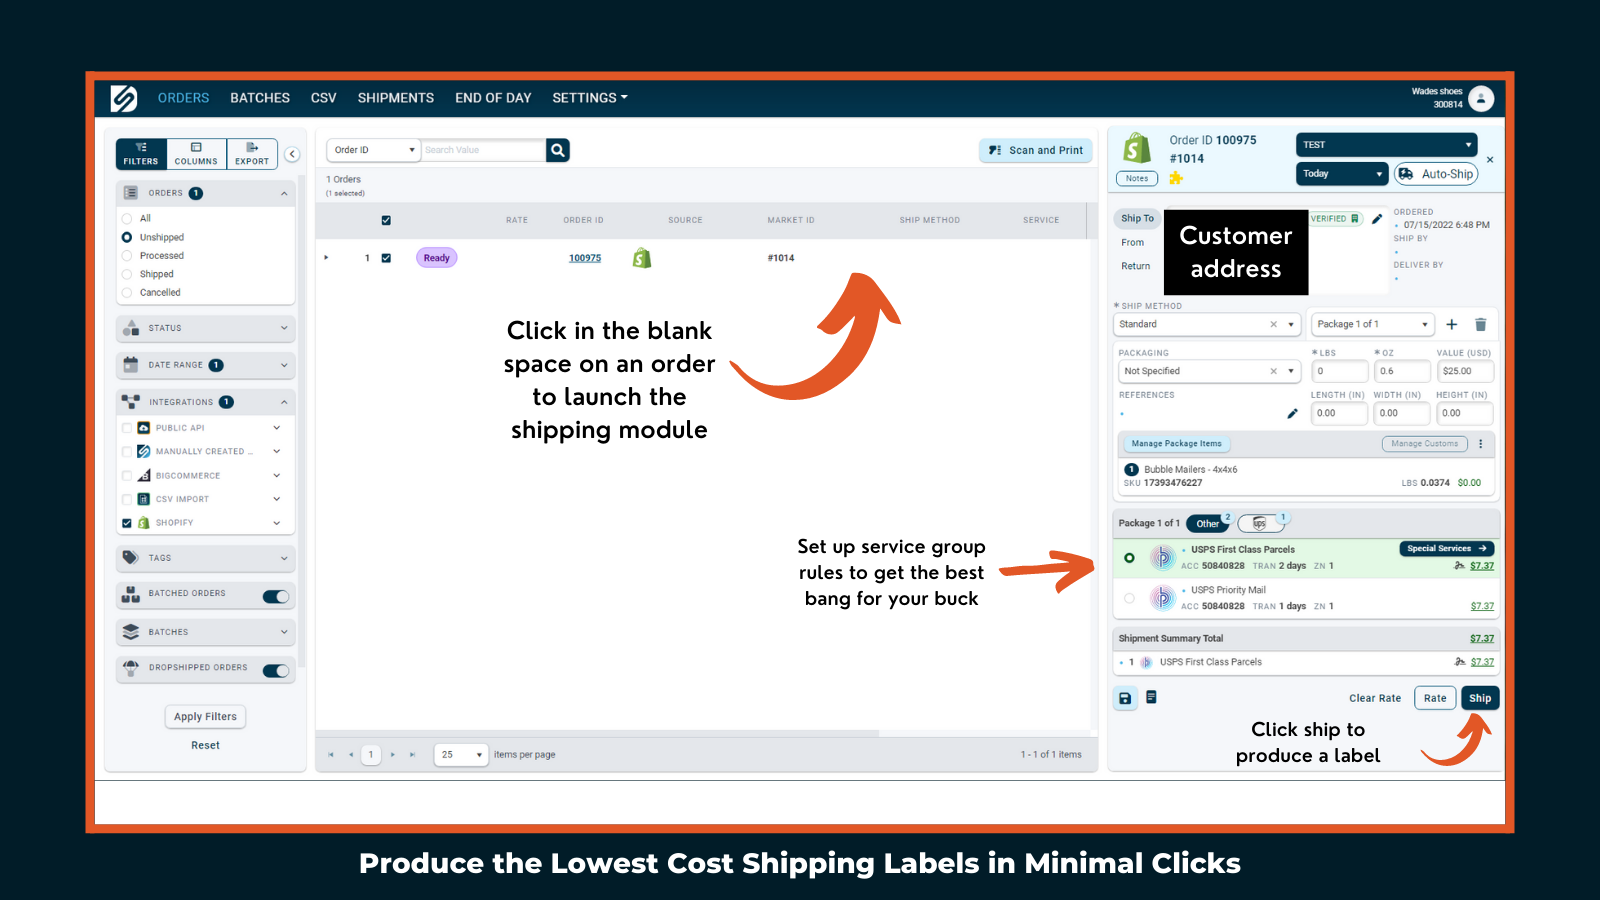 Produce the lowest cost shipping labels in minimal clicks